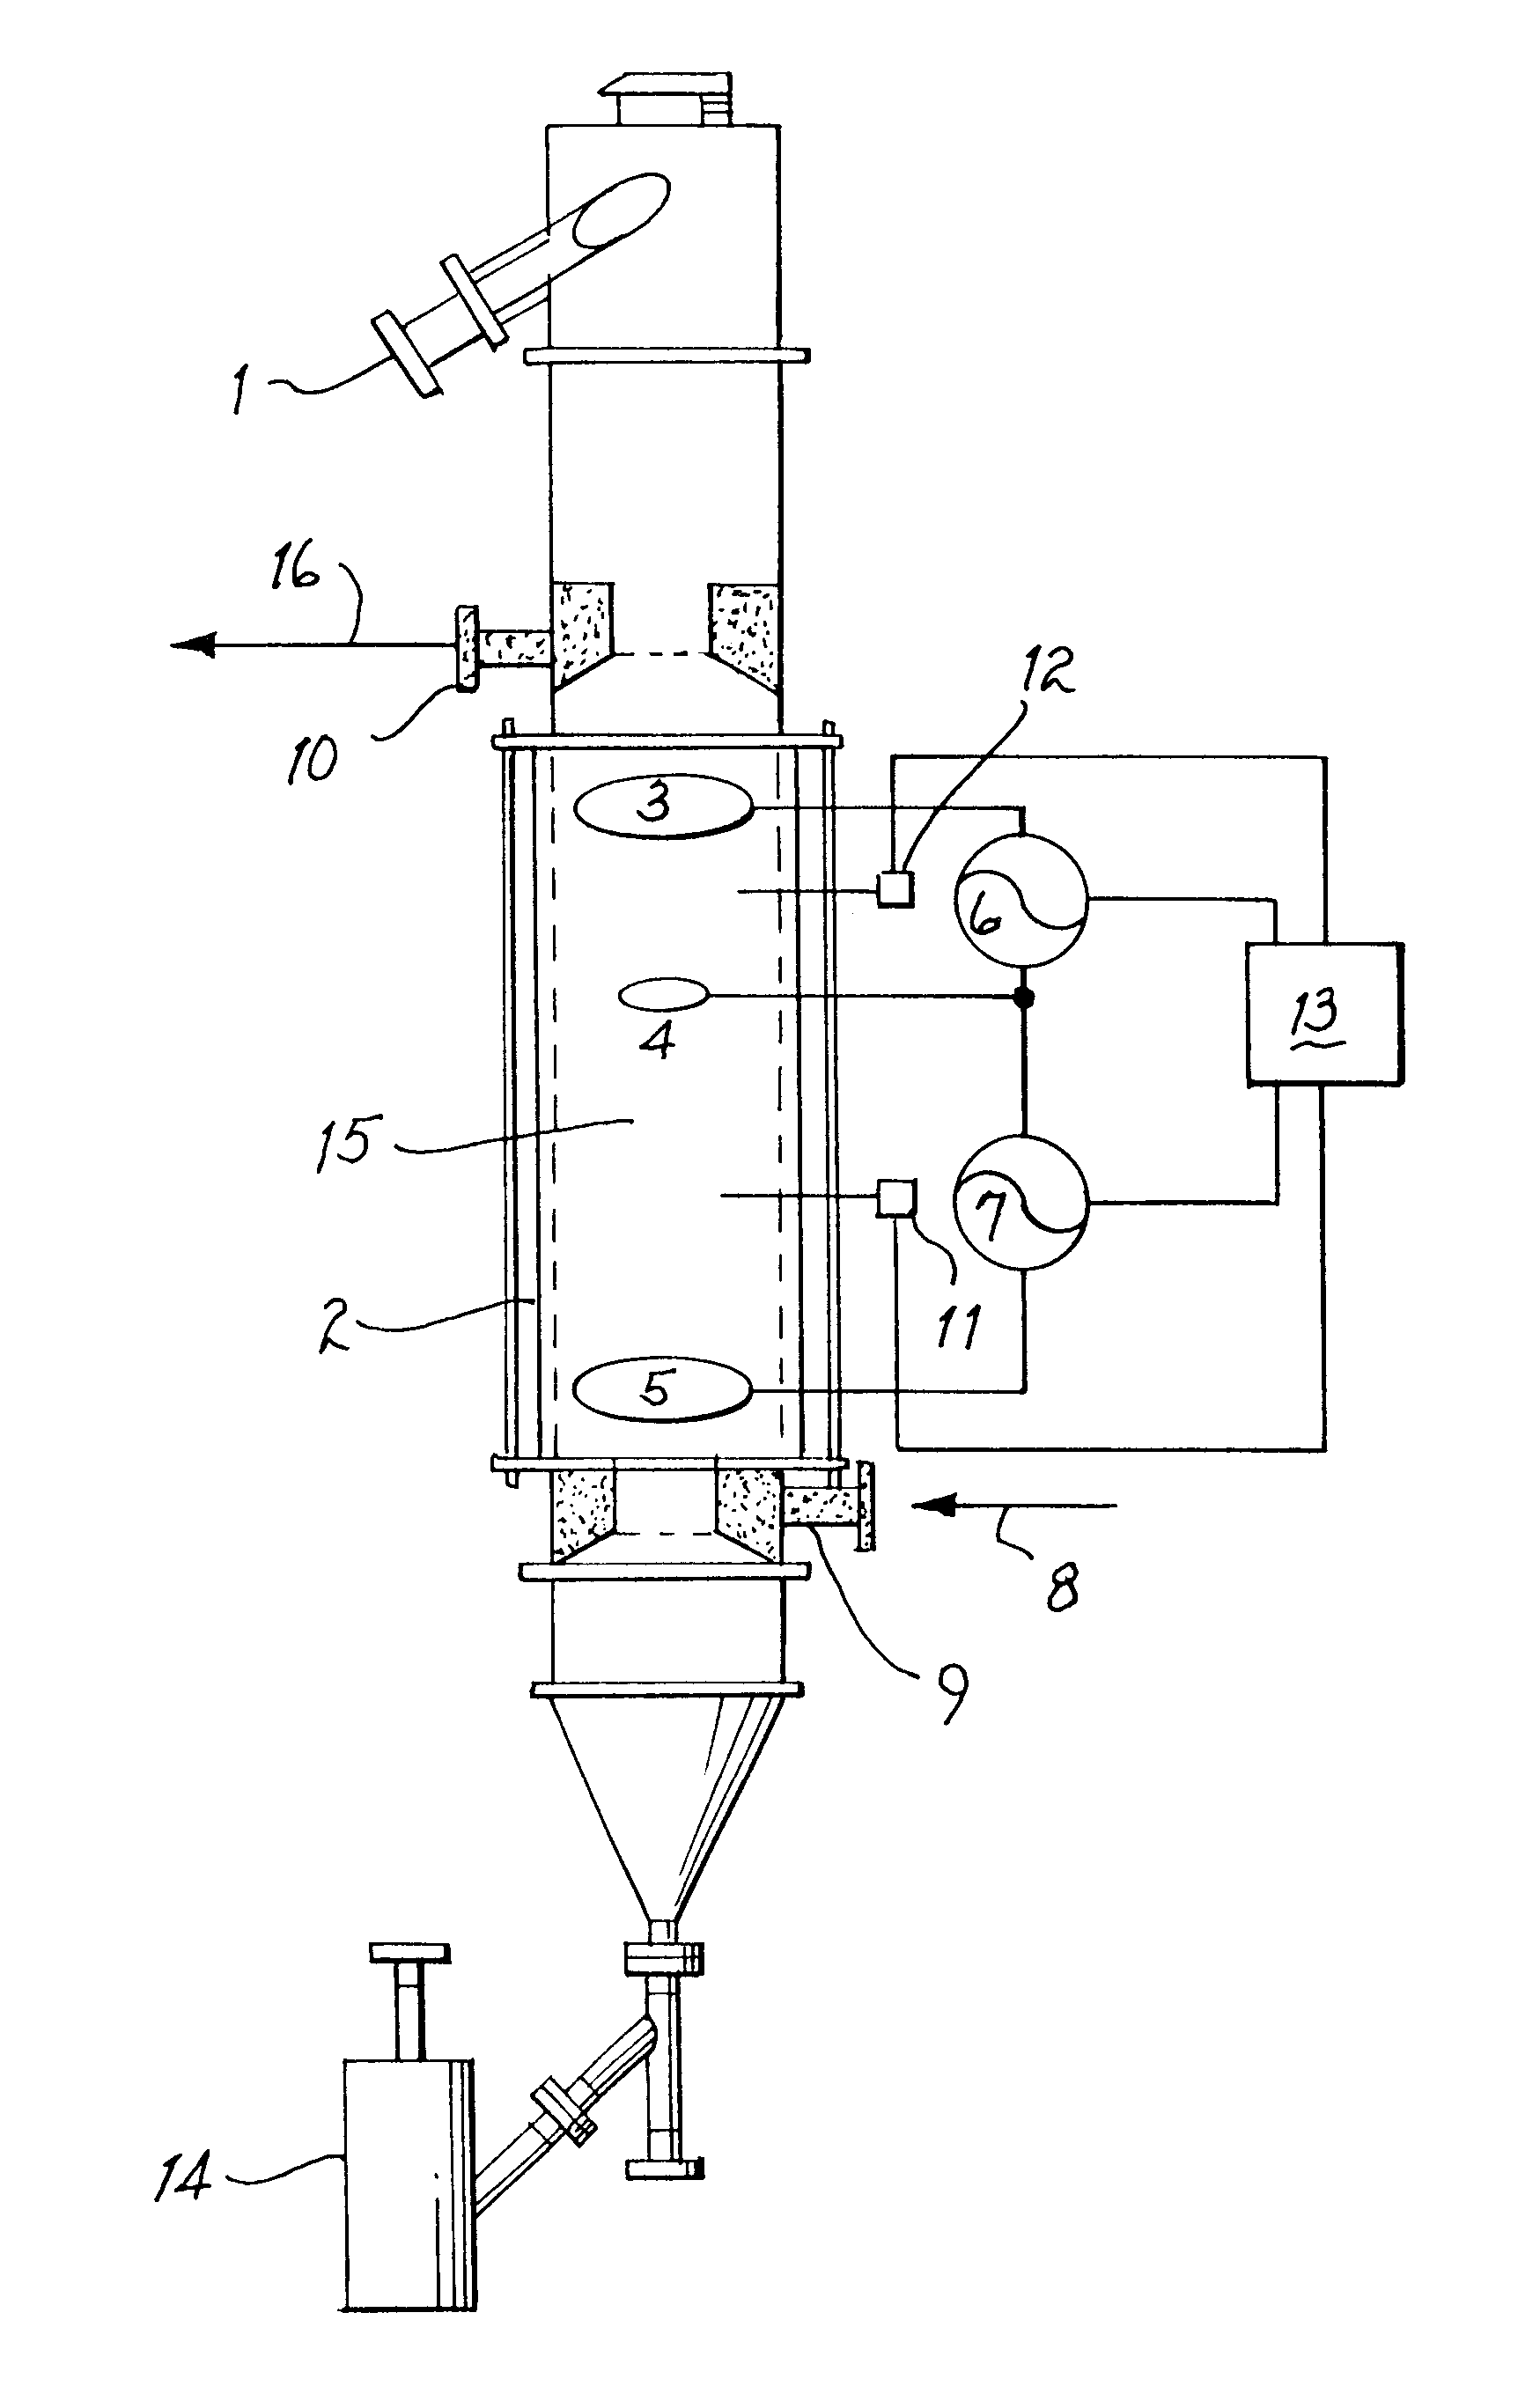 Method and apparatus for controlled heating of adsorbent materials